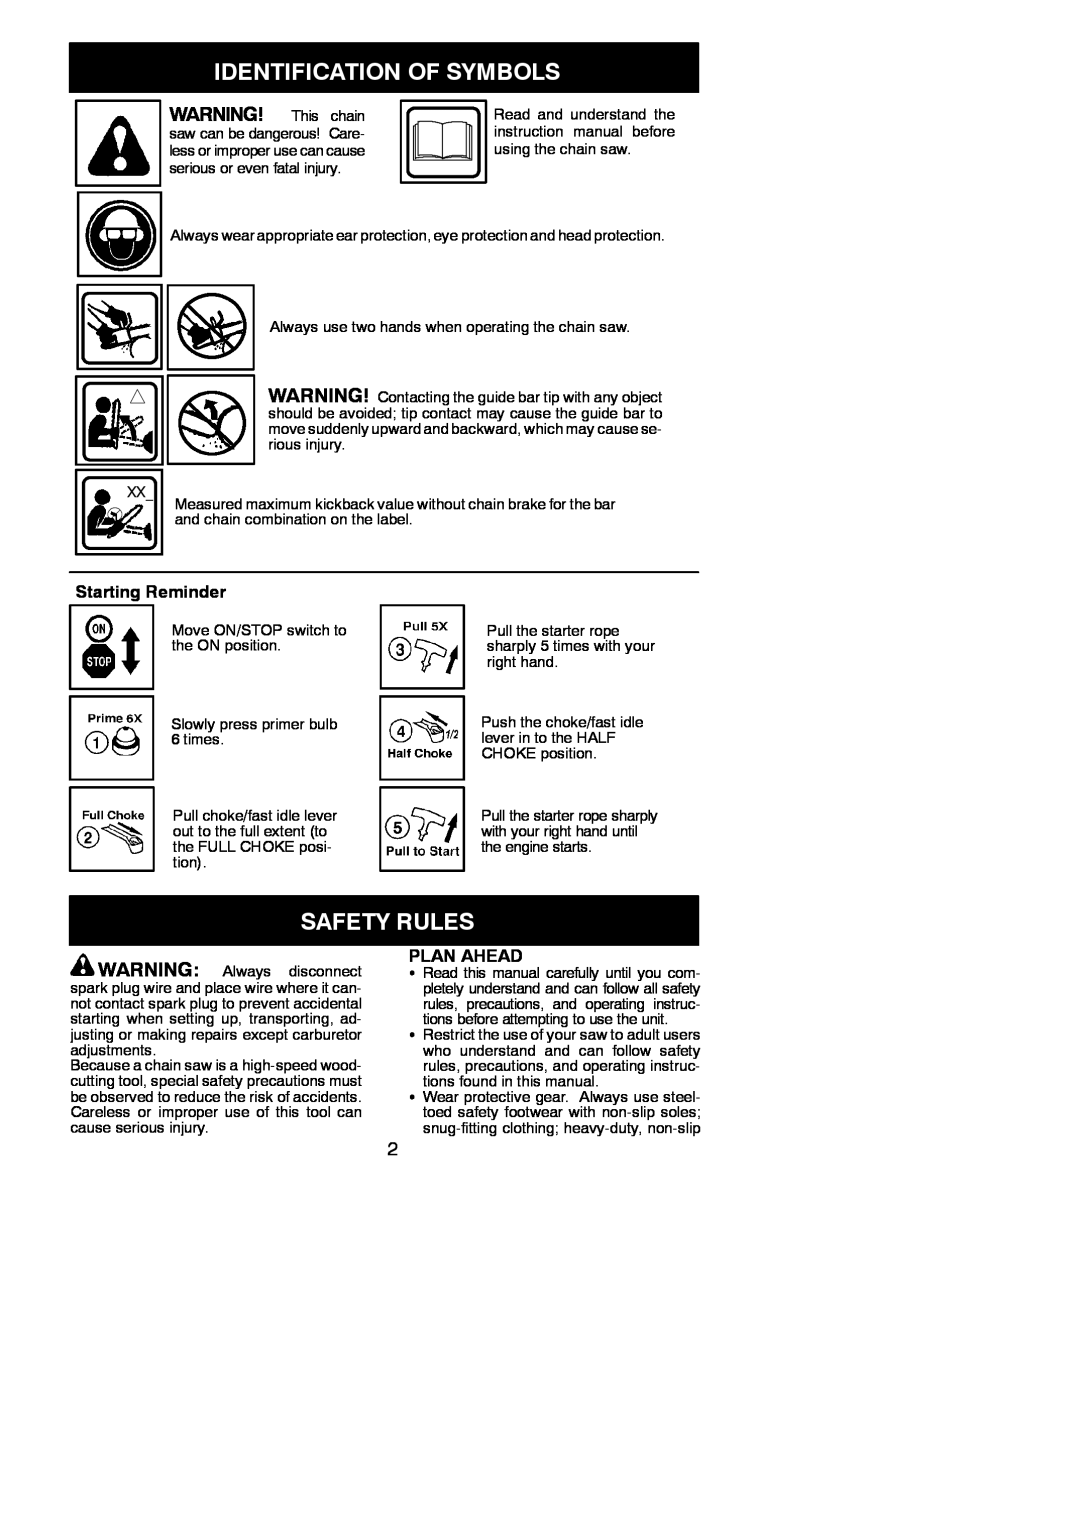 Poulan 545137231 instruction manual Identification Of Symbols, Safety Rules, Starting Reminder, Plan Ahead 